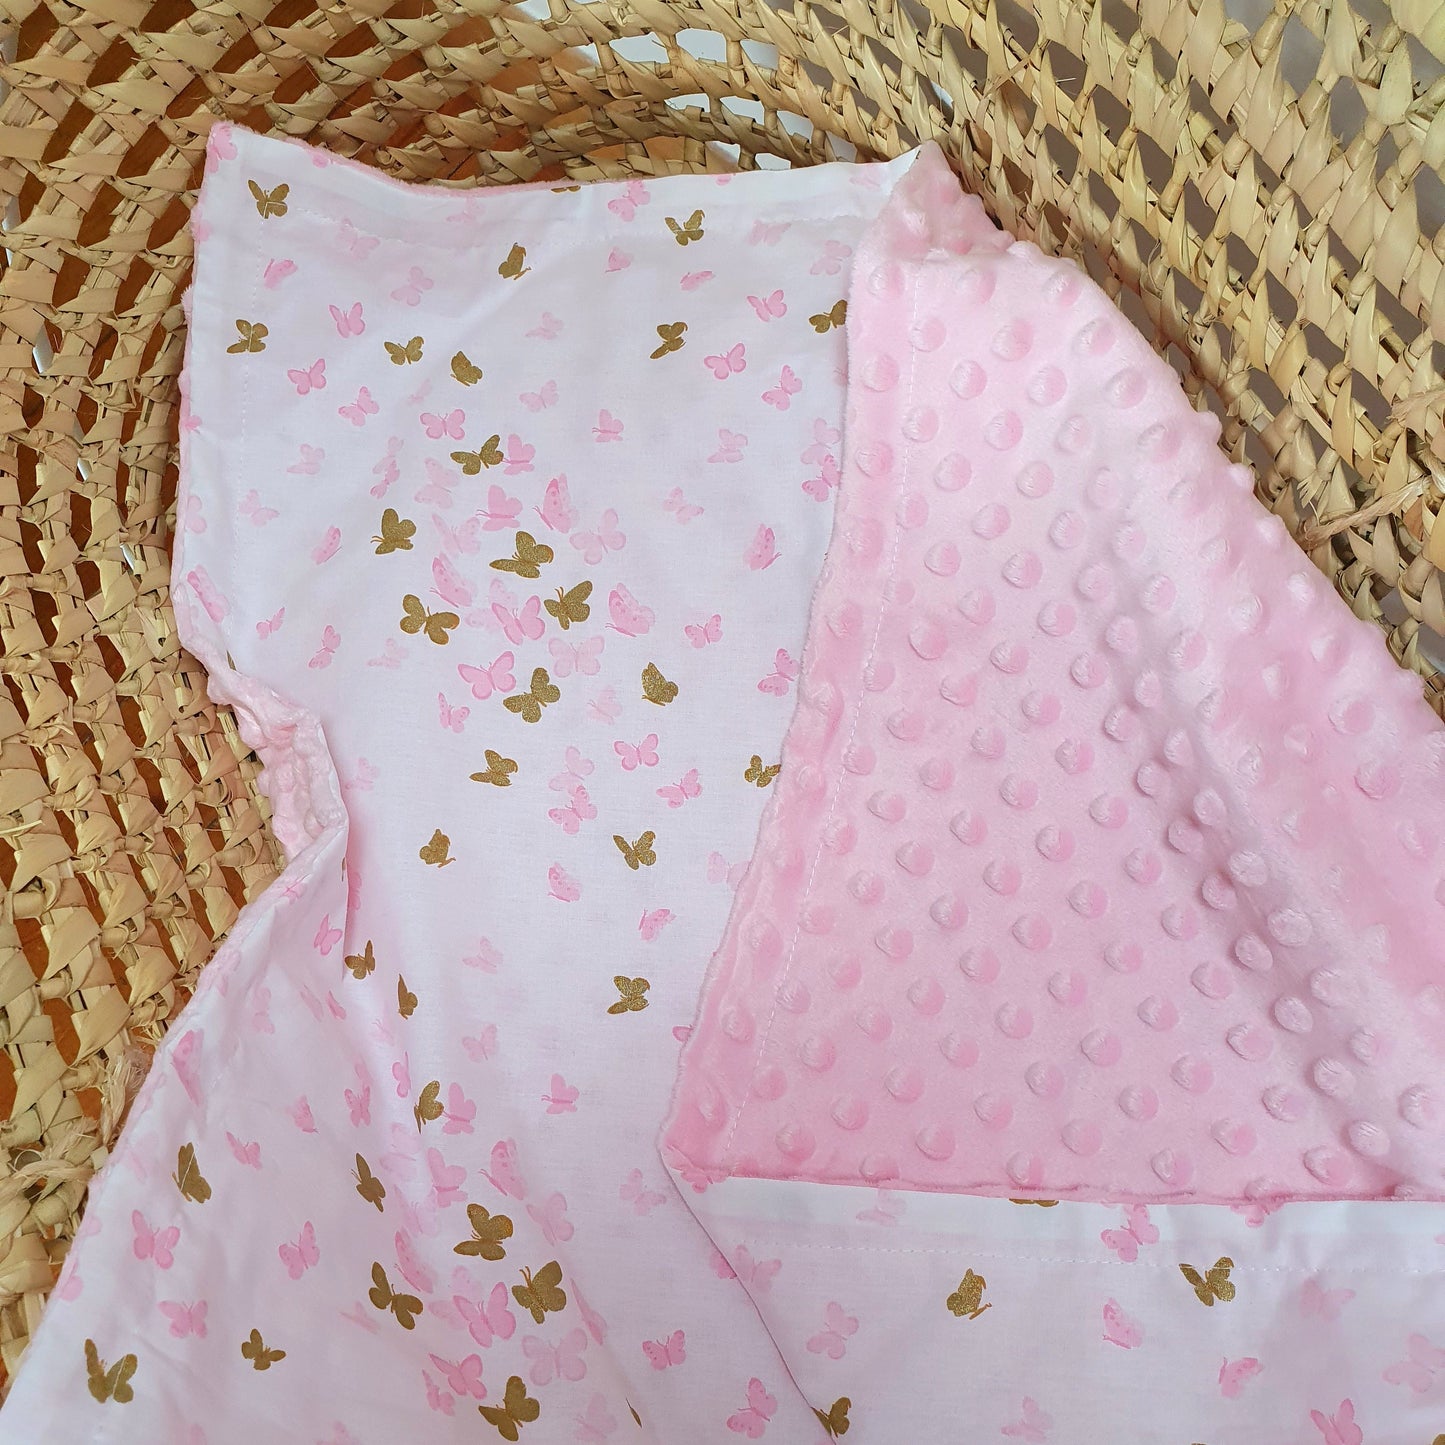 Gift set of 2: Baby blanket and balloon, Butterflies Pink